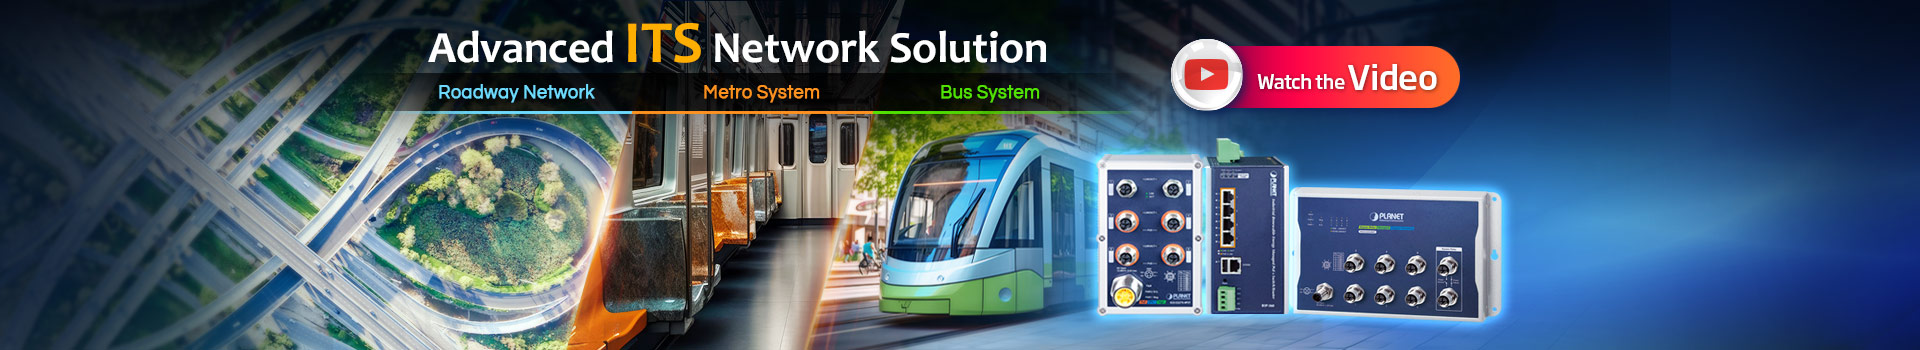 Advanced ITS Network Solution